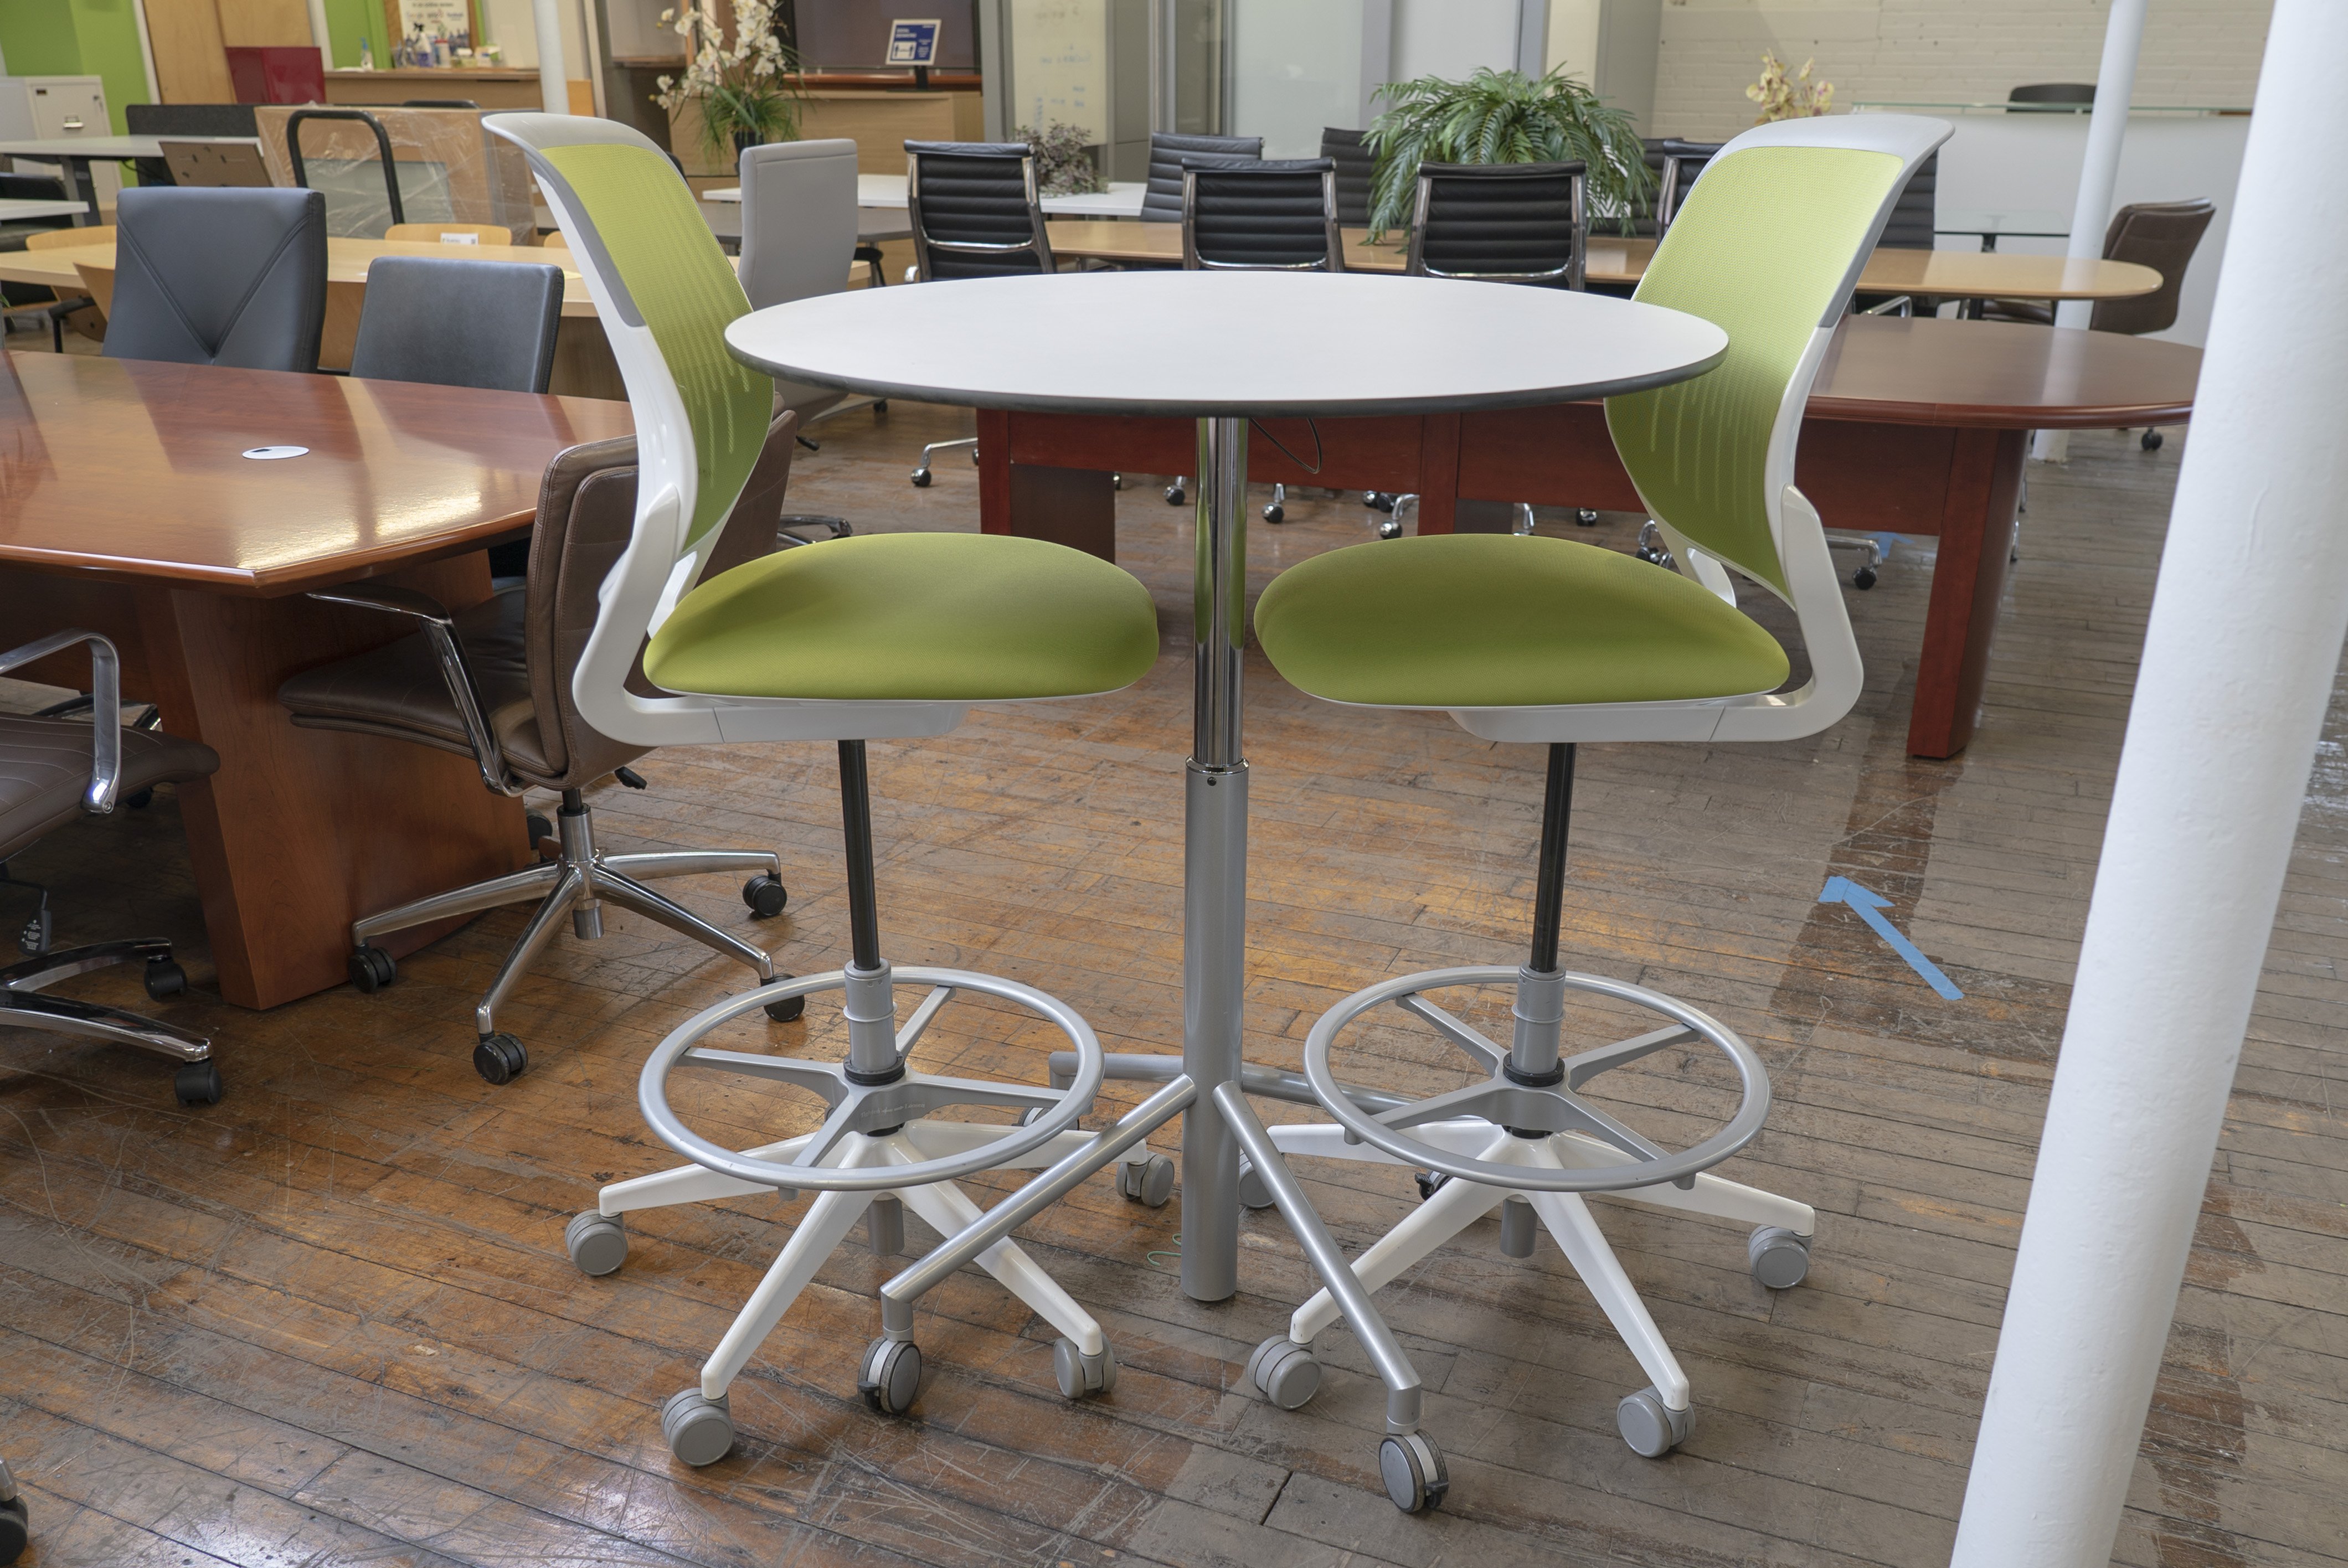 36-pneumatic-height-adjustable-mobile-round-table